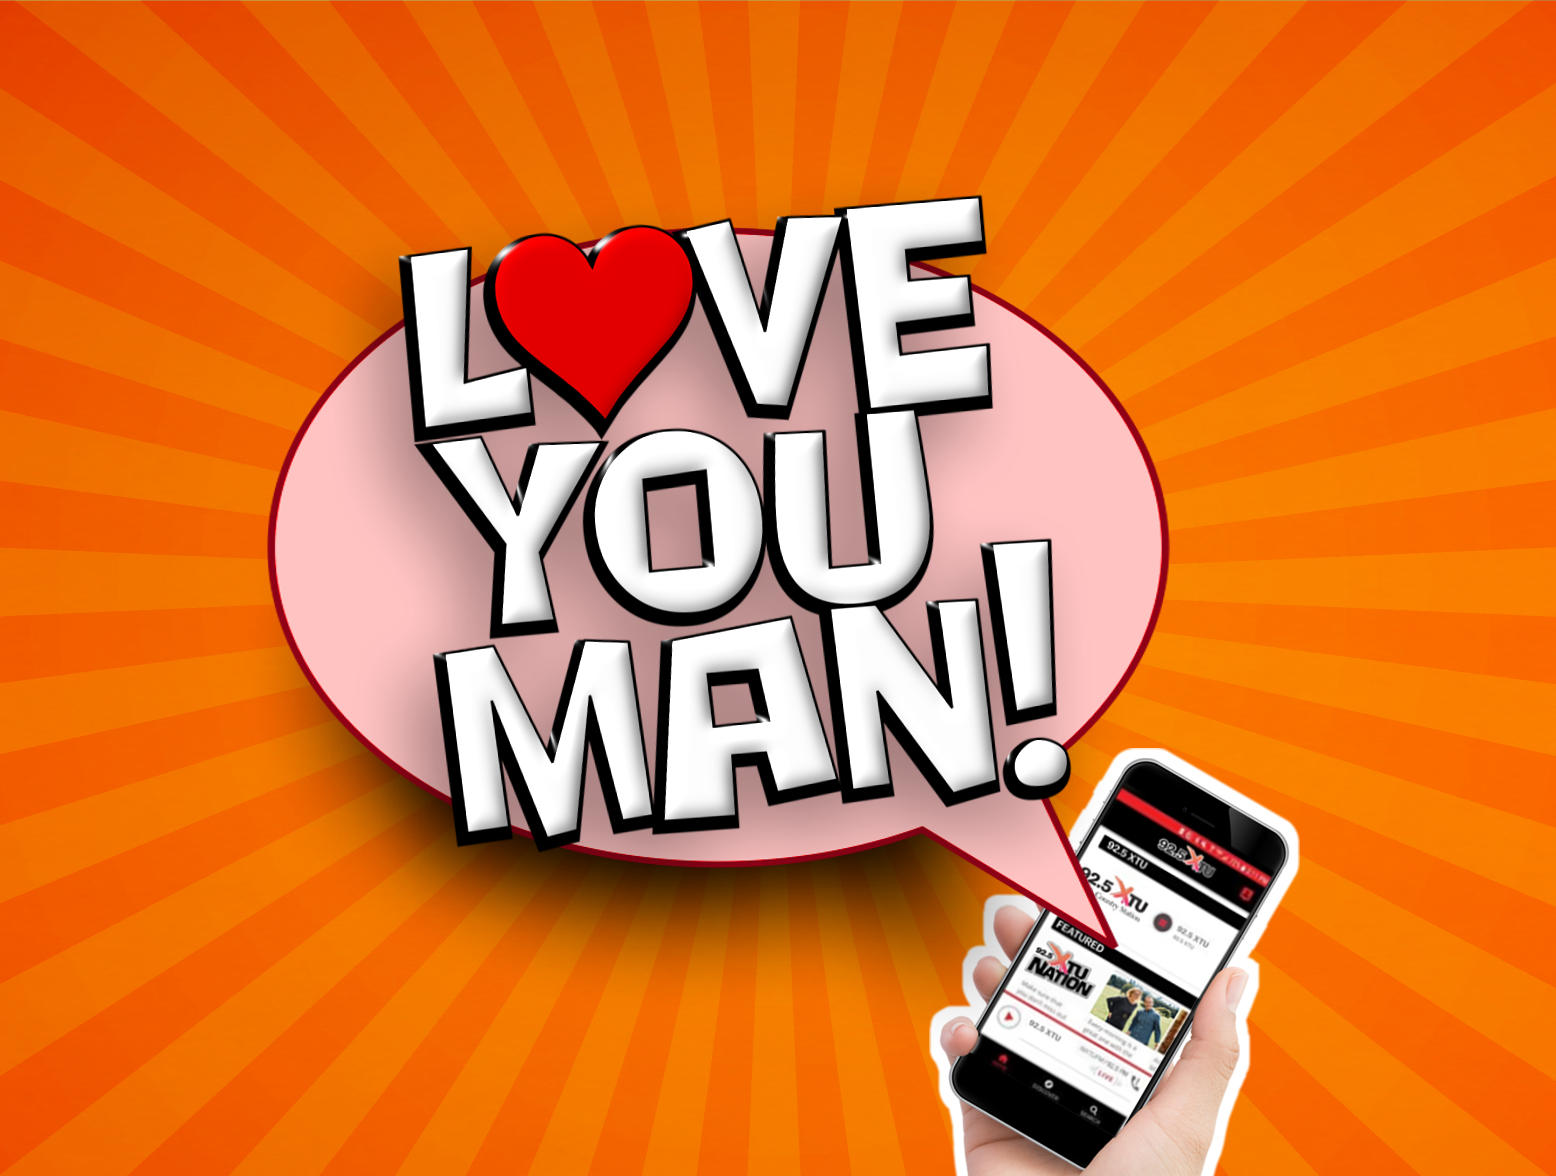 NEW: Love You Man - Decal Removal